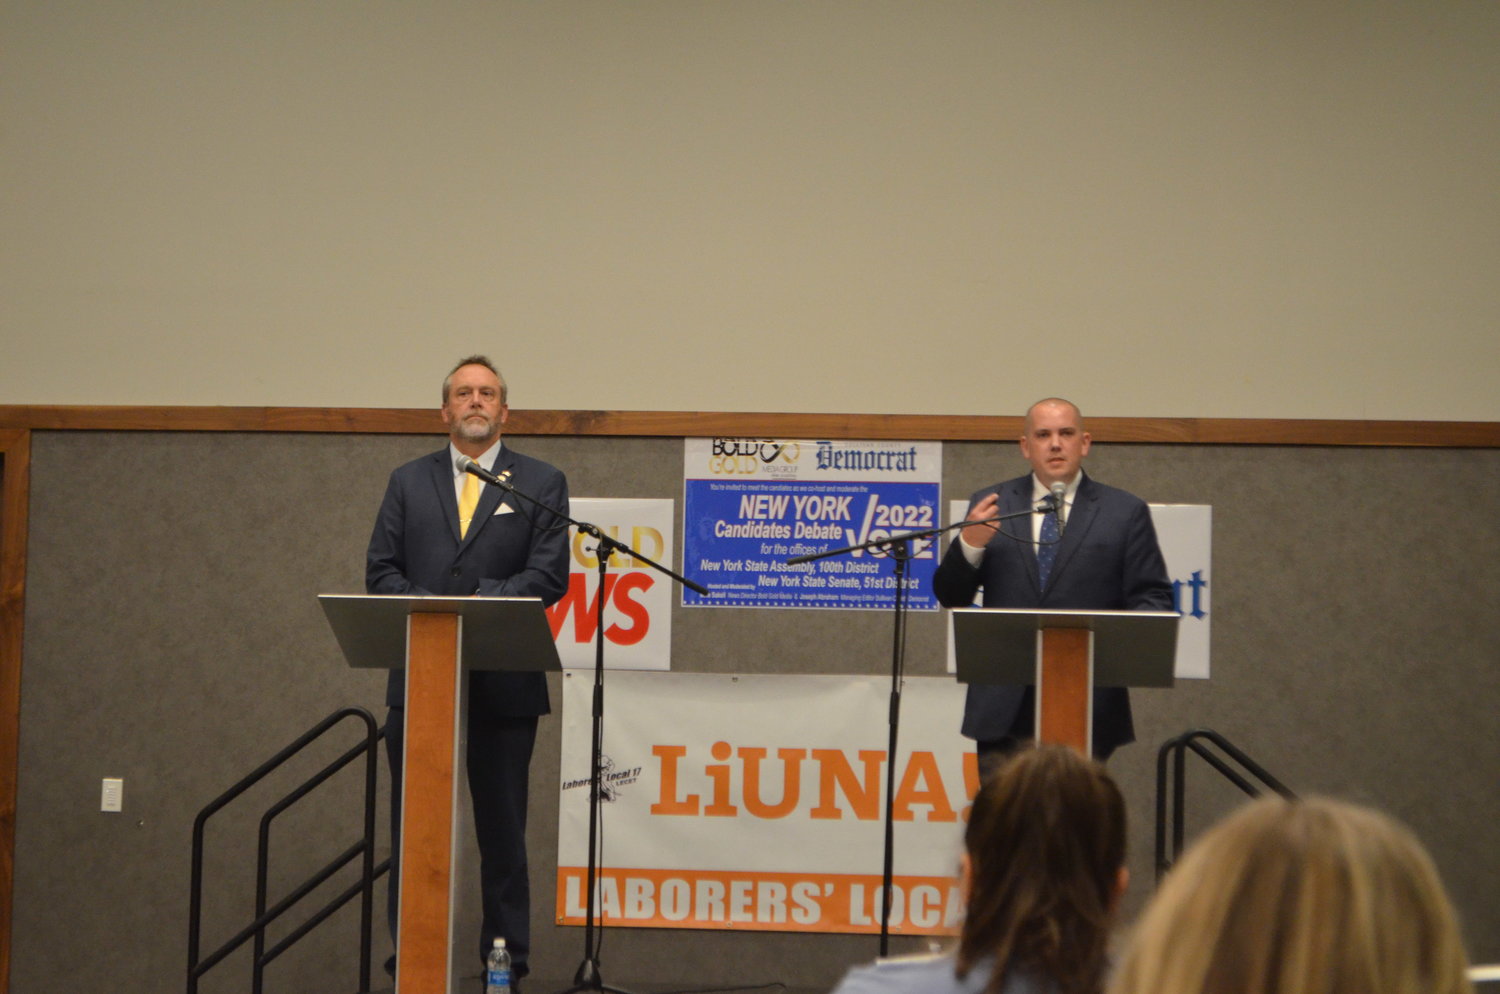 Senator Peter Oberacker, left, and candidate Eric Ball participating in an October 11 candidate debate for the 2022 New York State Elections. Oberacker and Ball are competing for the 51st state senate district.